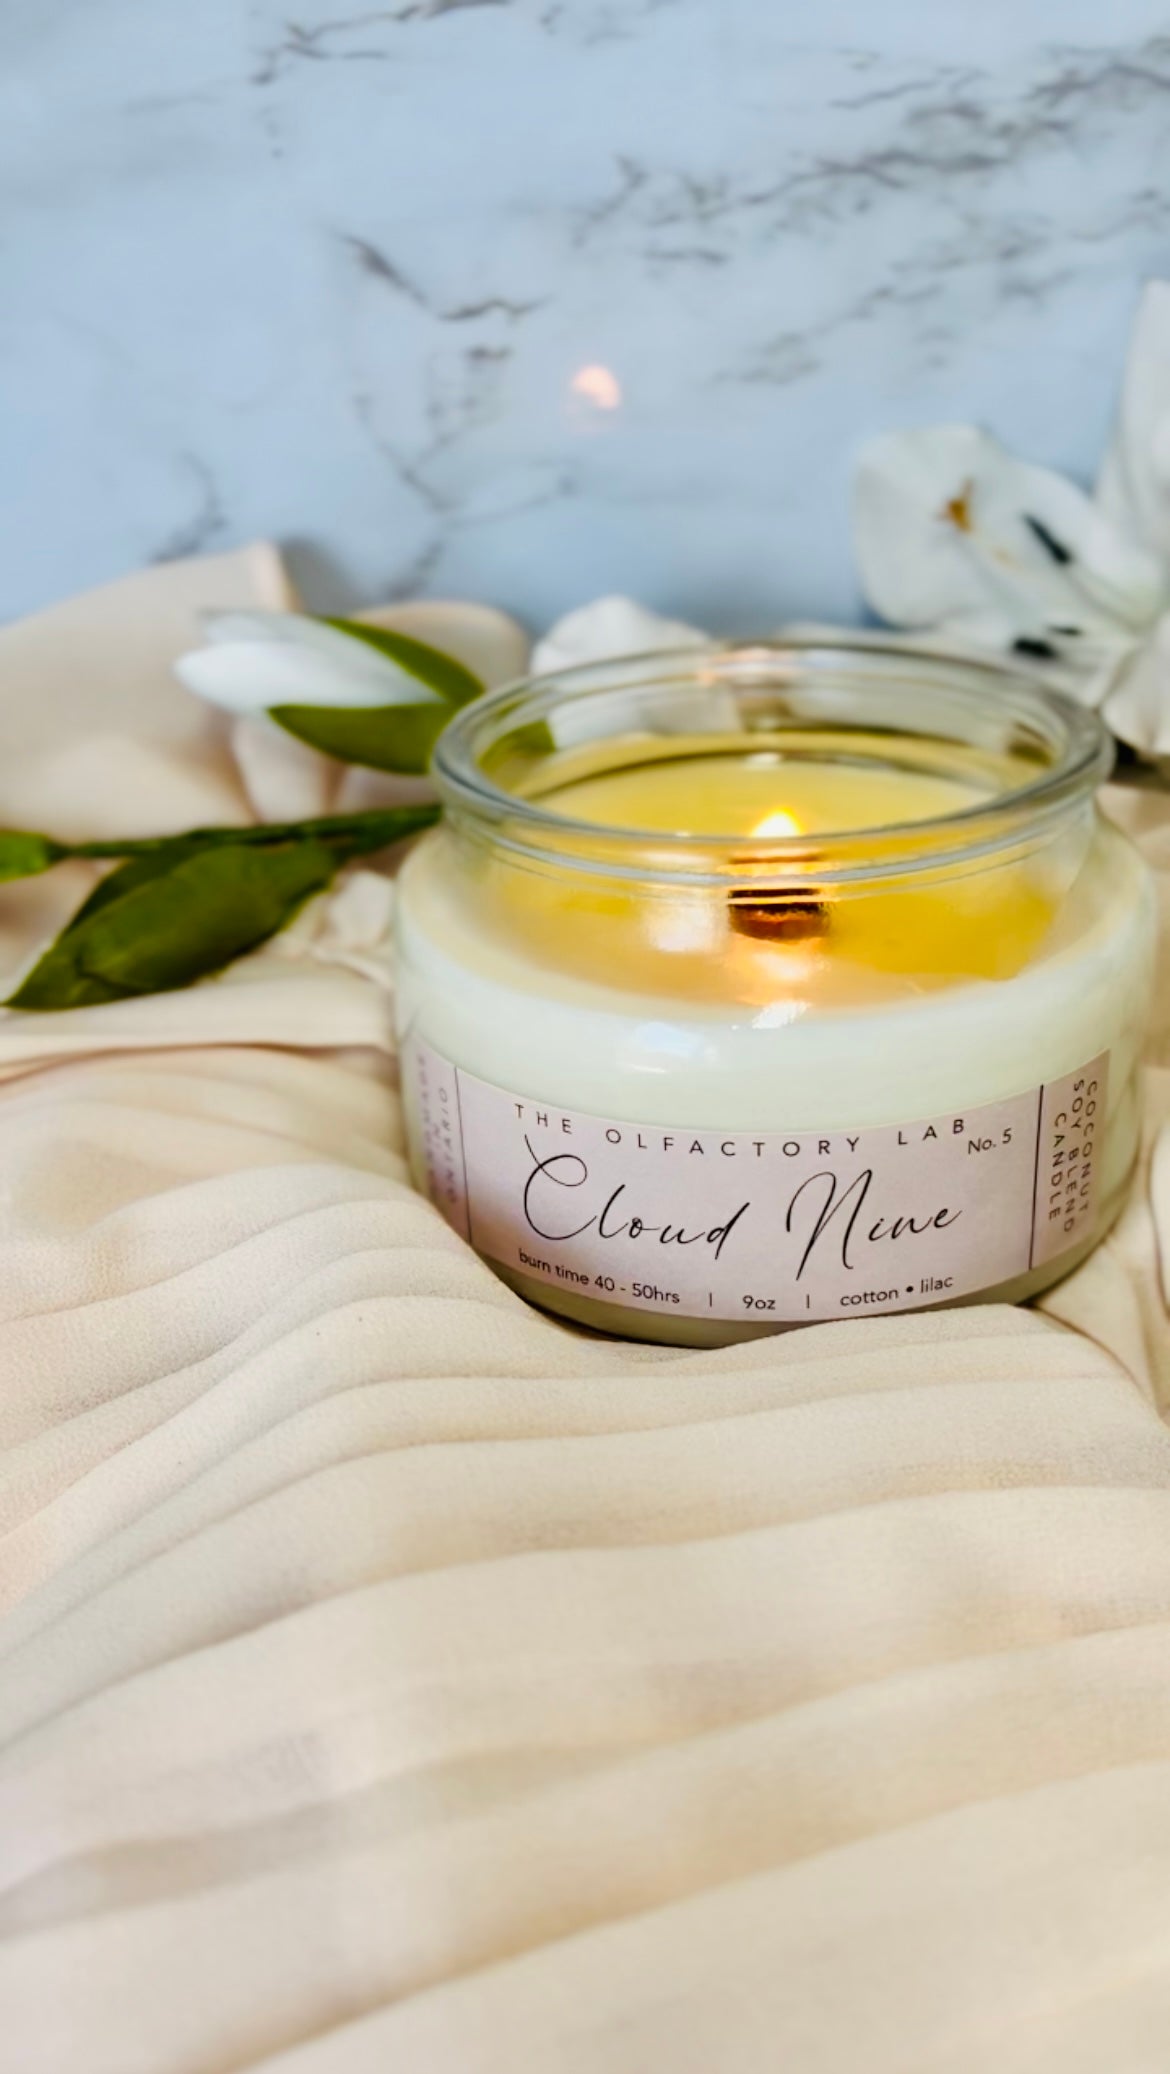 A lit Cloud Nine candle on a beige material against a marble background. 